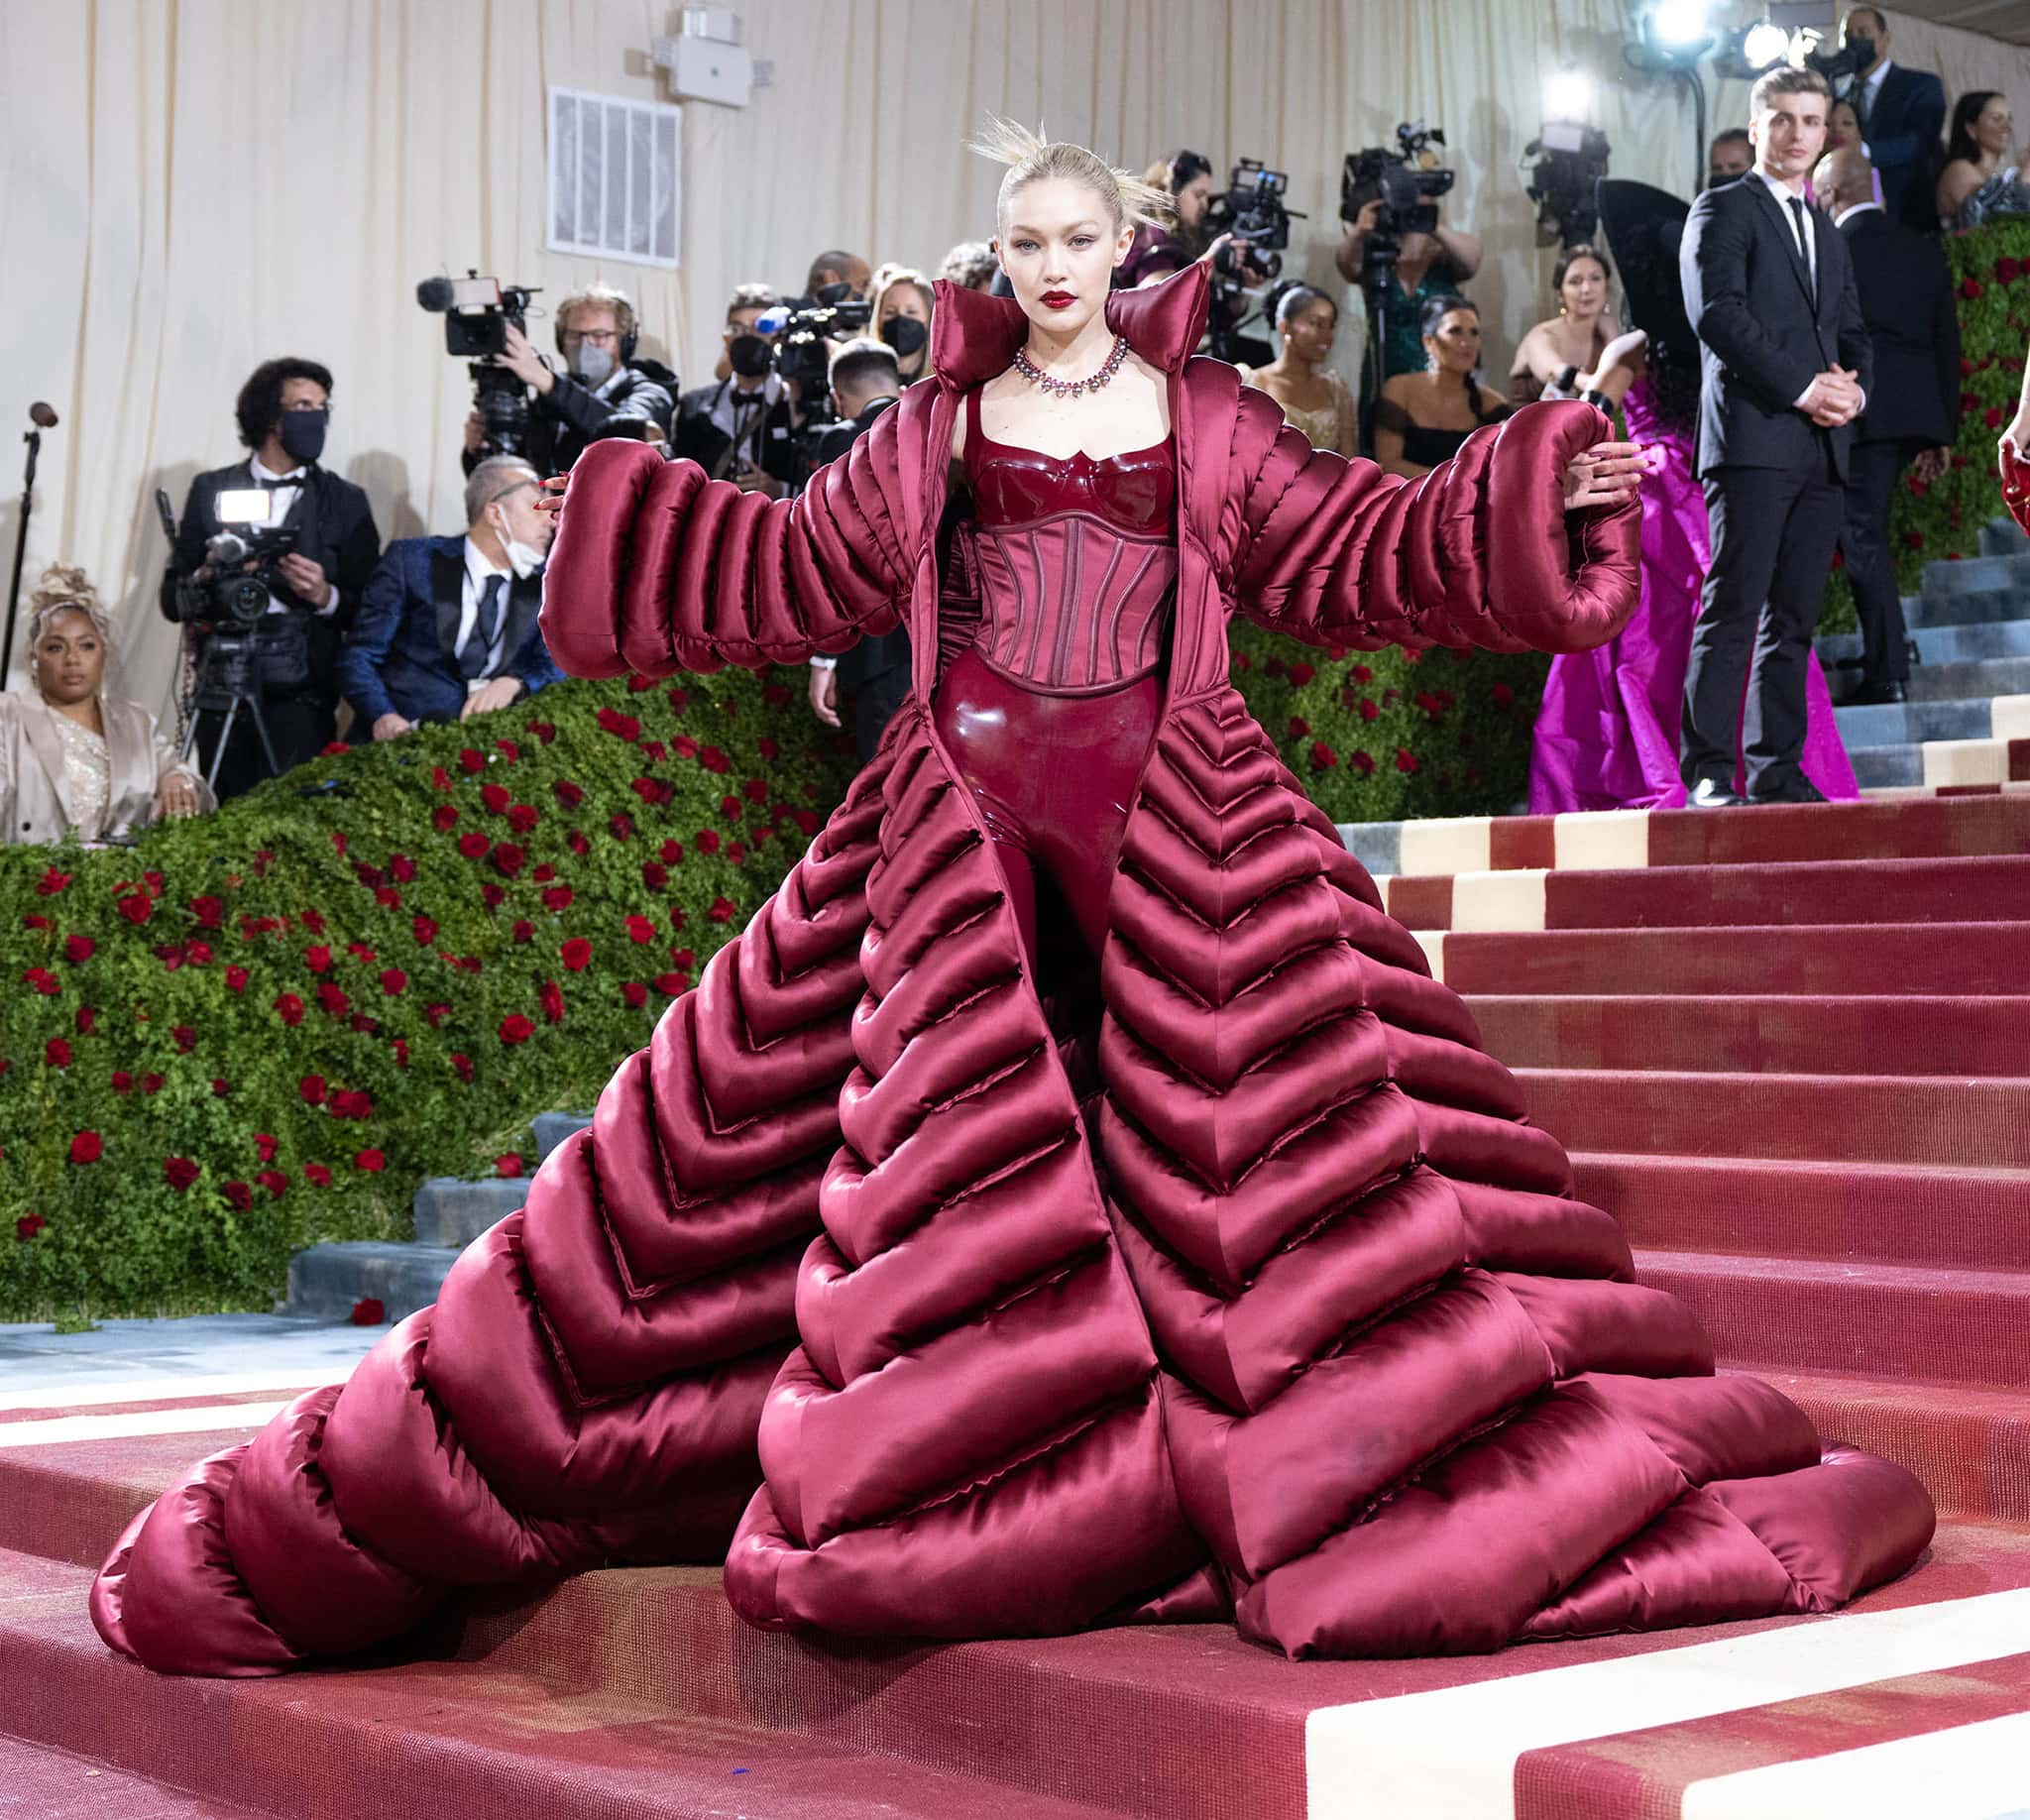 Gigi Hadid reminds us of Marvel's Scarlett Witch at the 2022 Met Gala